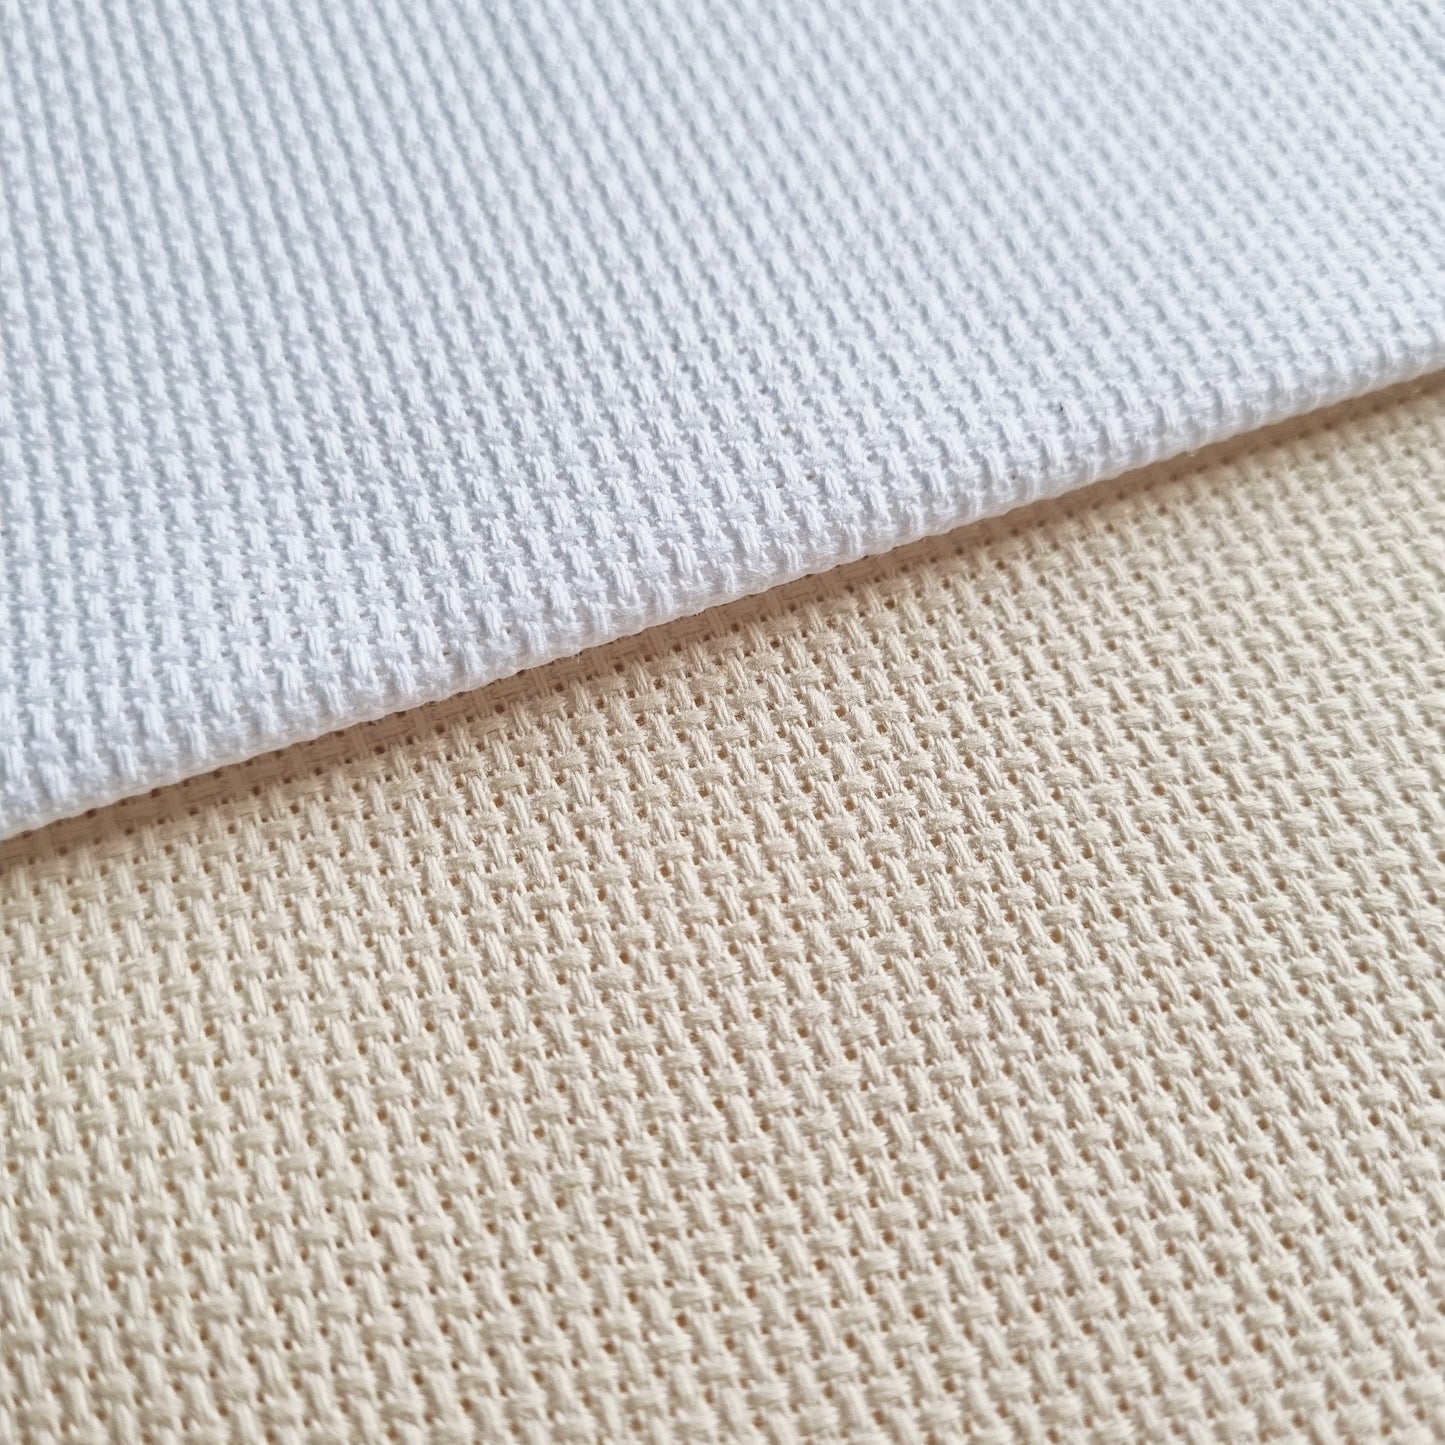 14 Count Aida Fabric 59 x 43 Inches in White or Cream